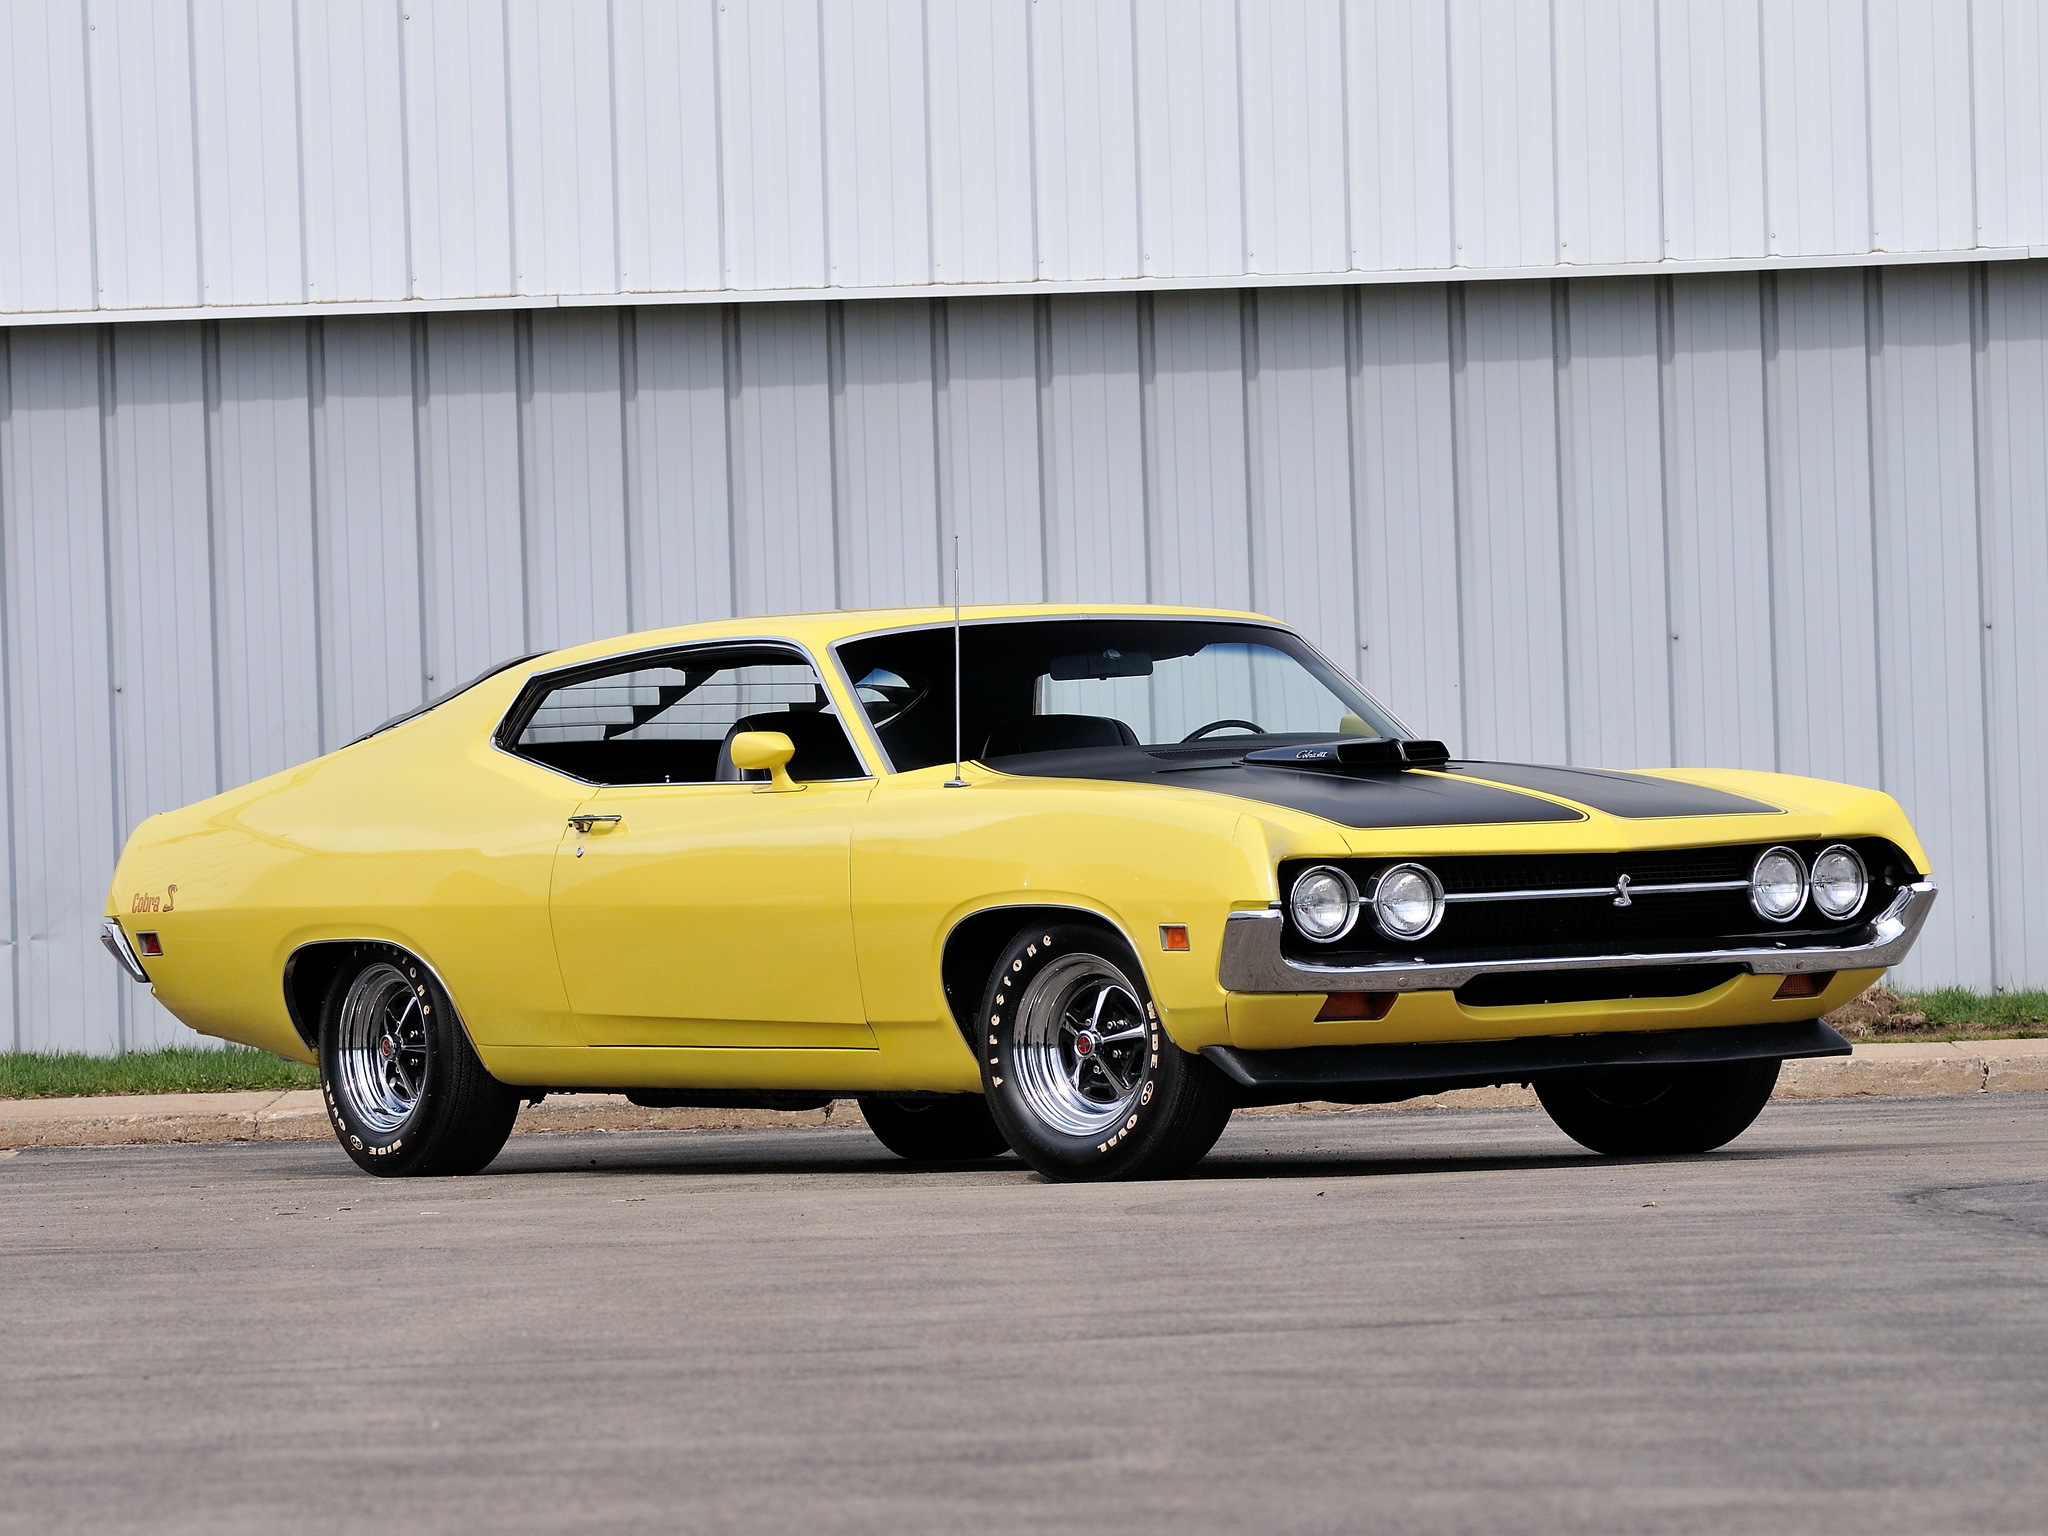 Ford Torino Cobra Backgrounds on Wallpapers Vista